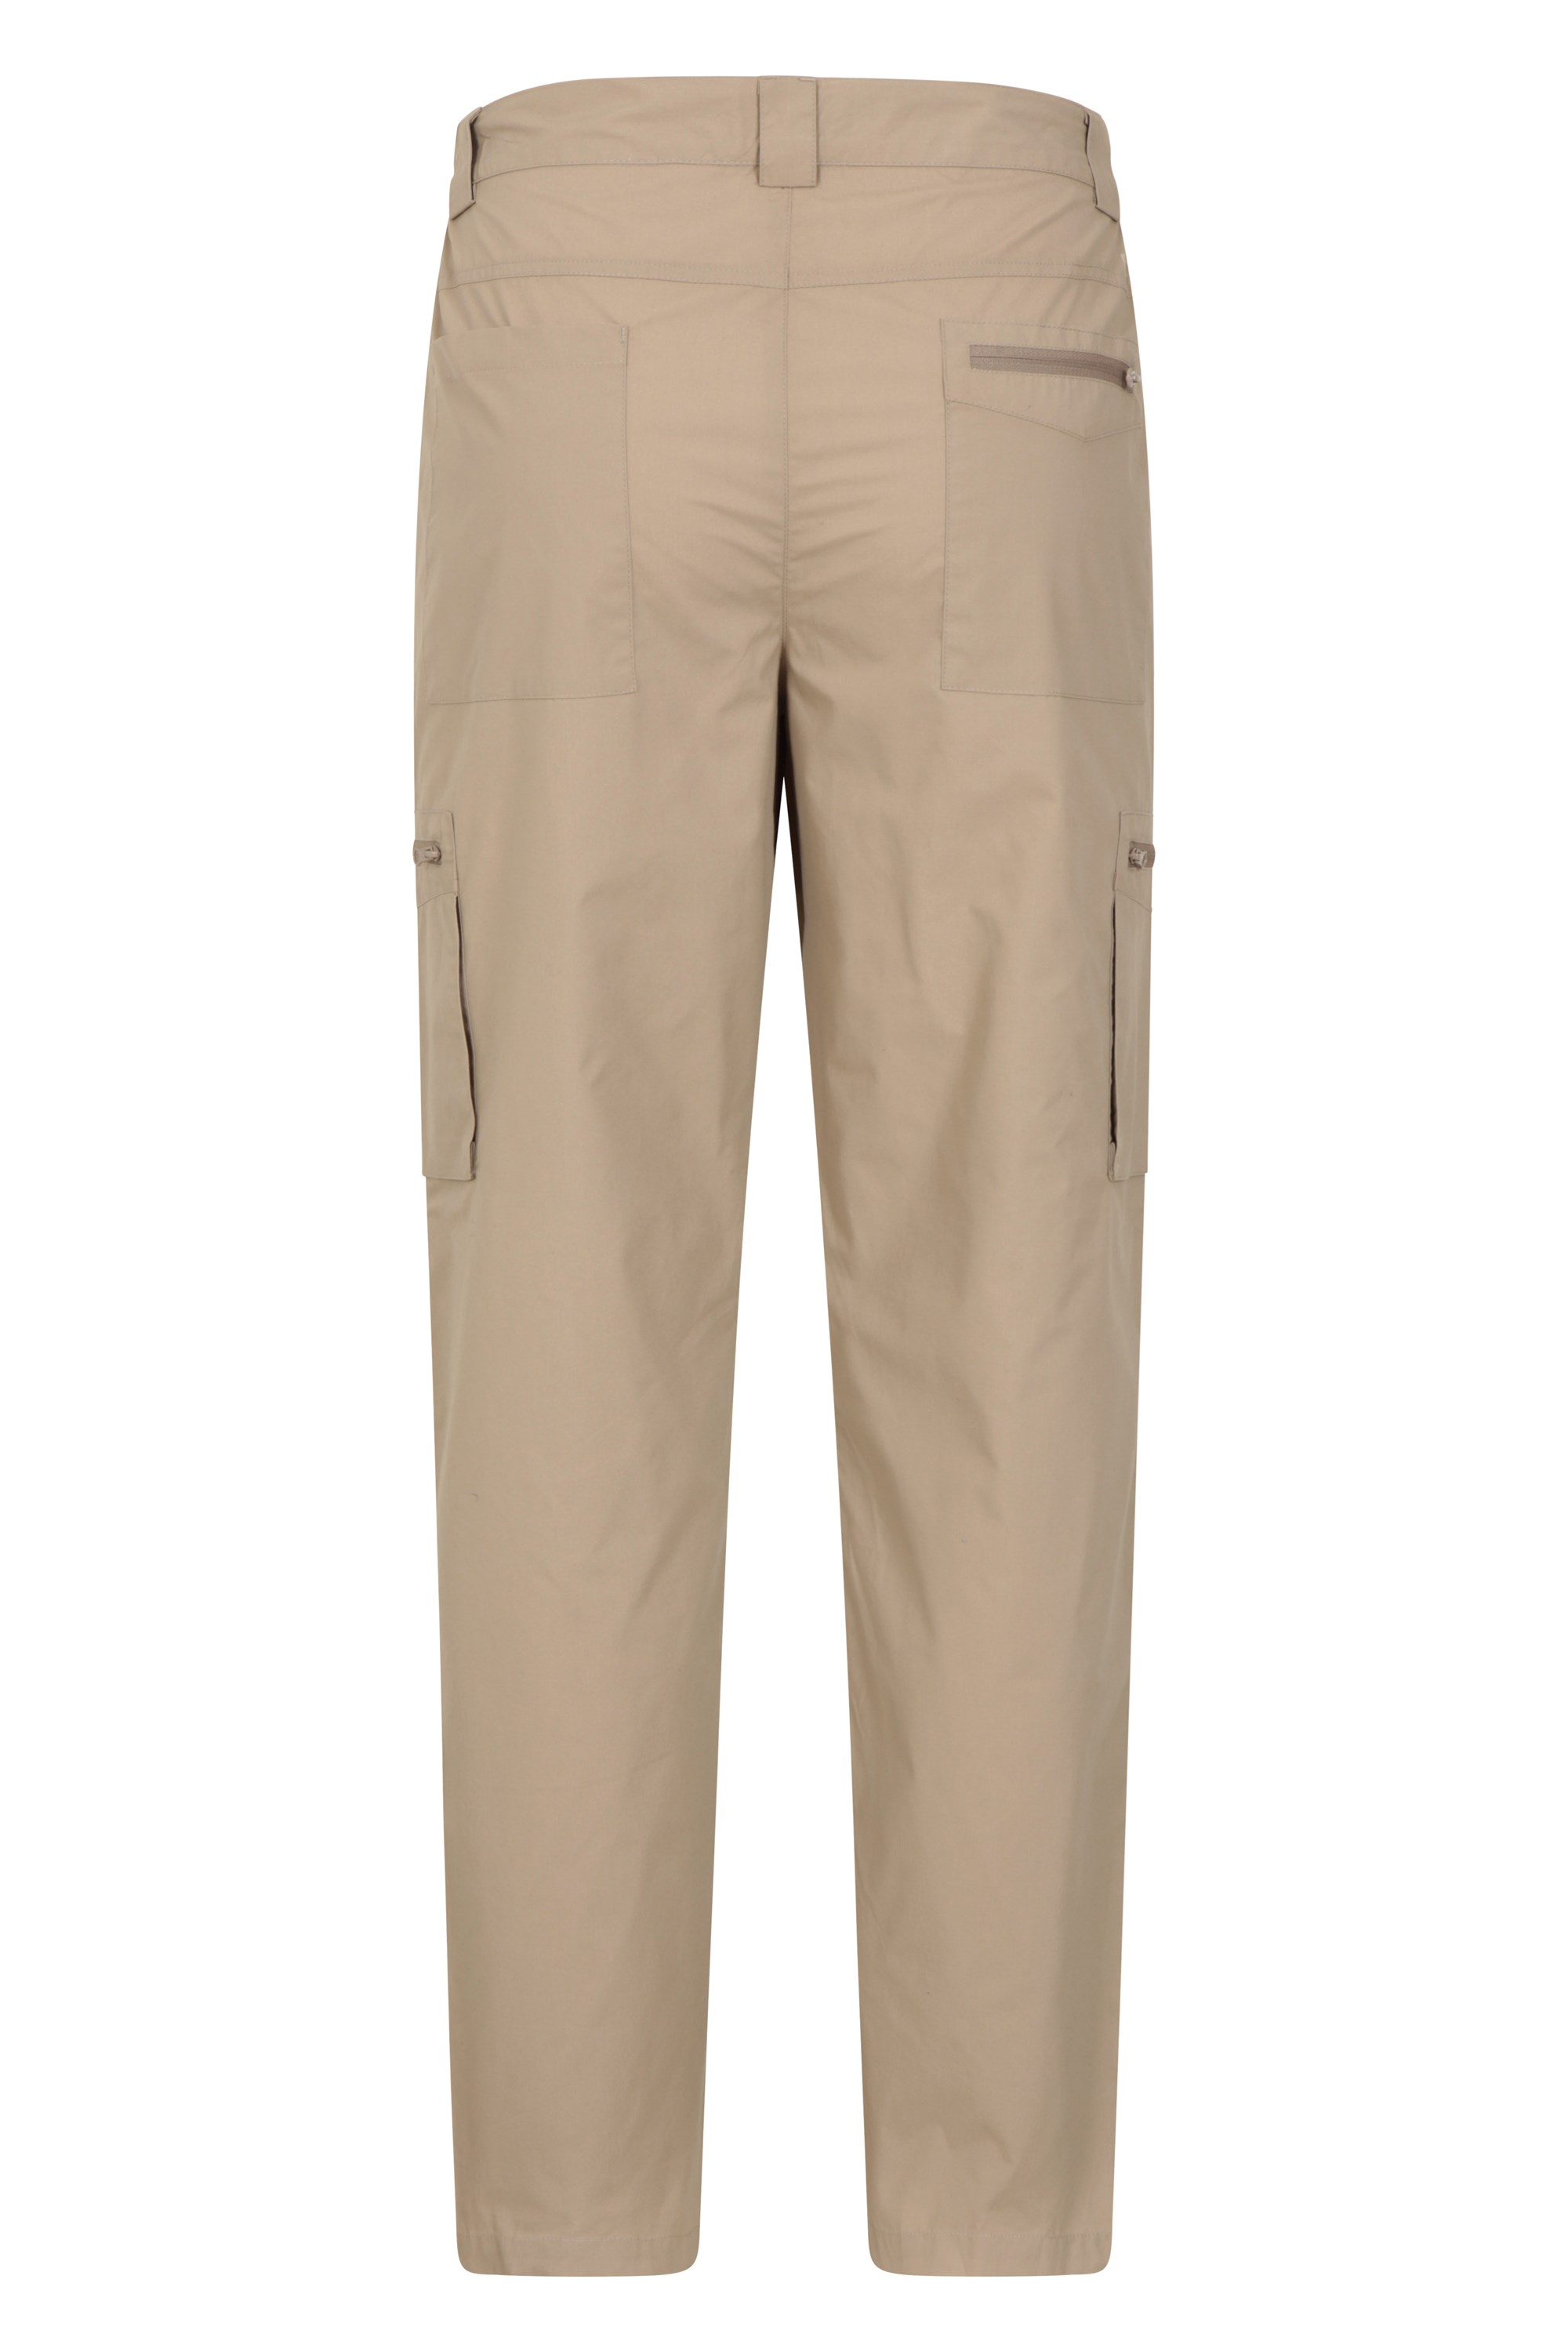 Womens Hiking Trousers Lightweight Walking Quick Dry India  Ubuy